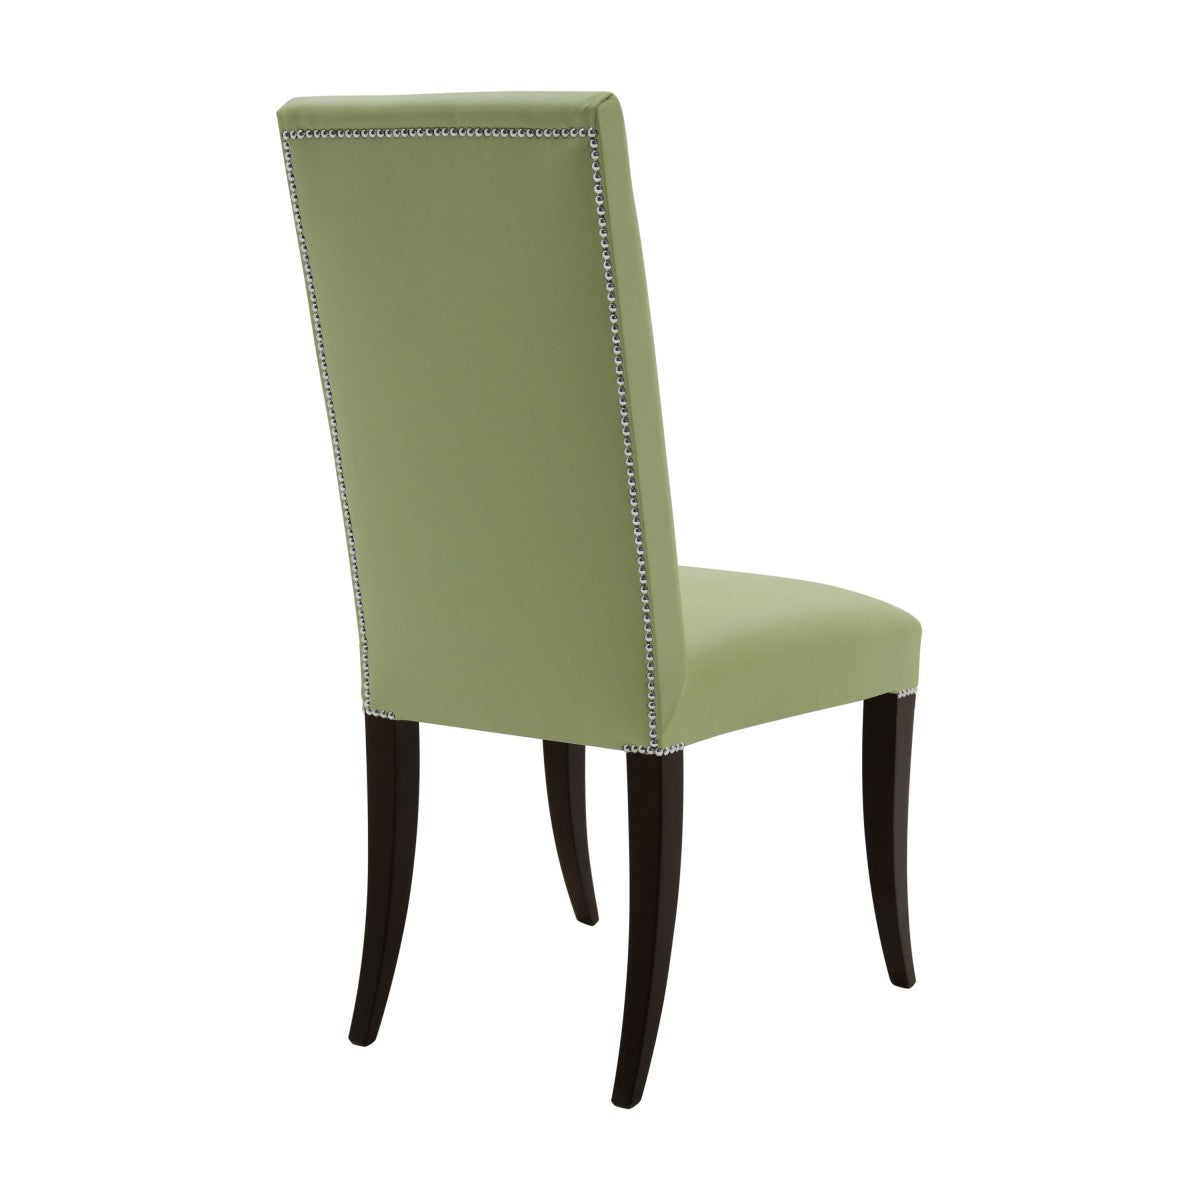 Luna Bespoke Upholstered Modern Contemporary Dining Chair MS146S Custom Made To Order